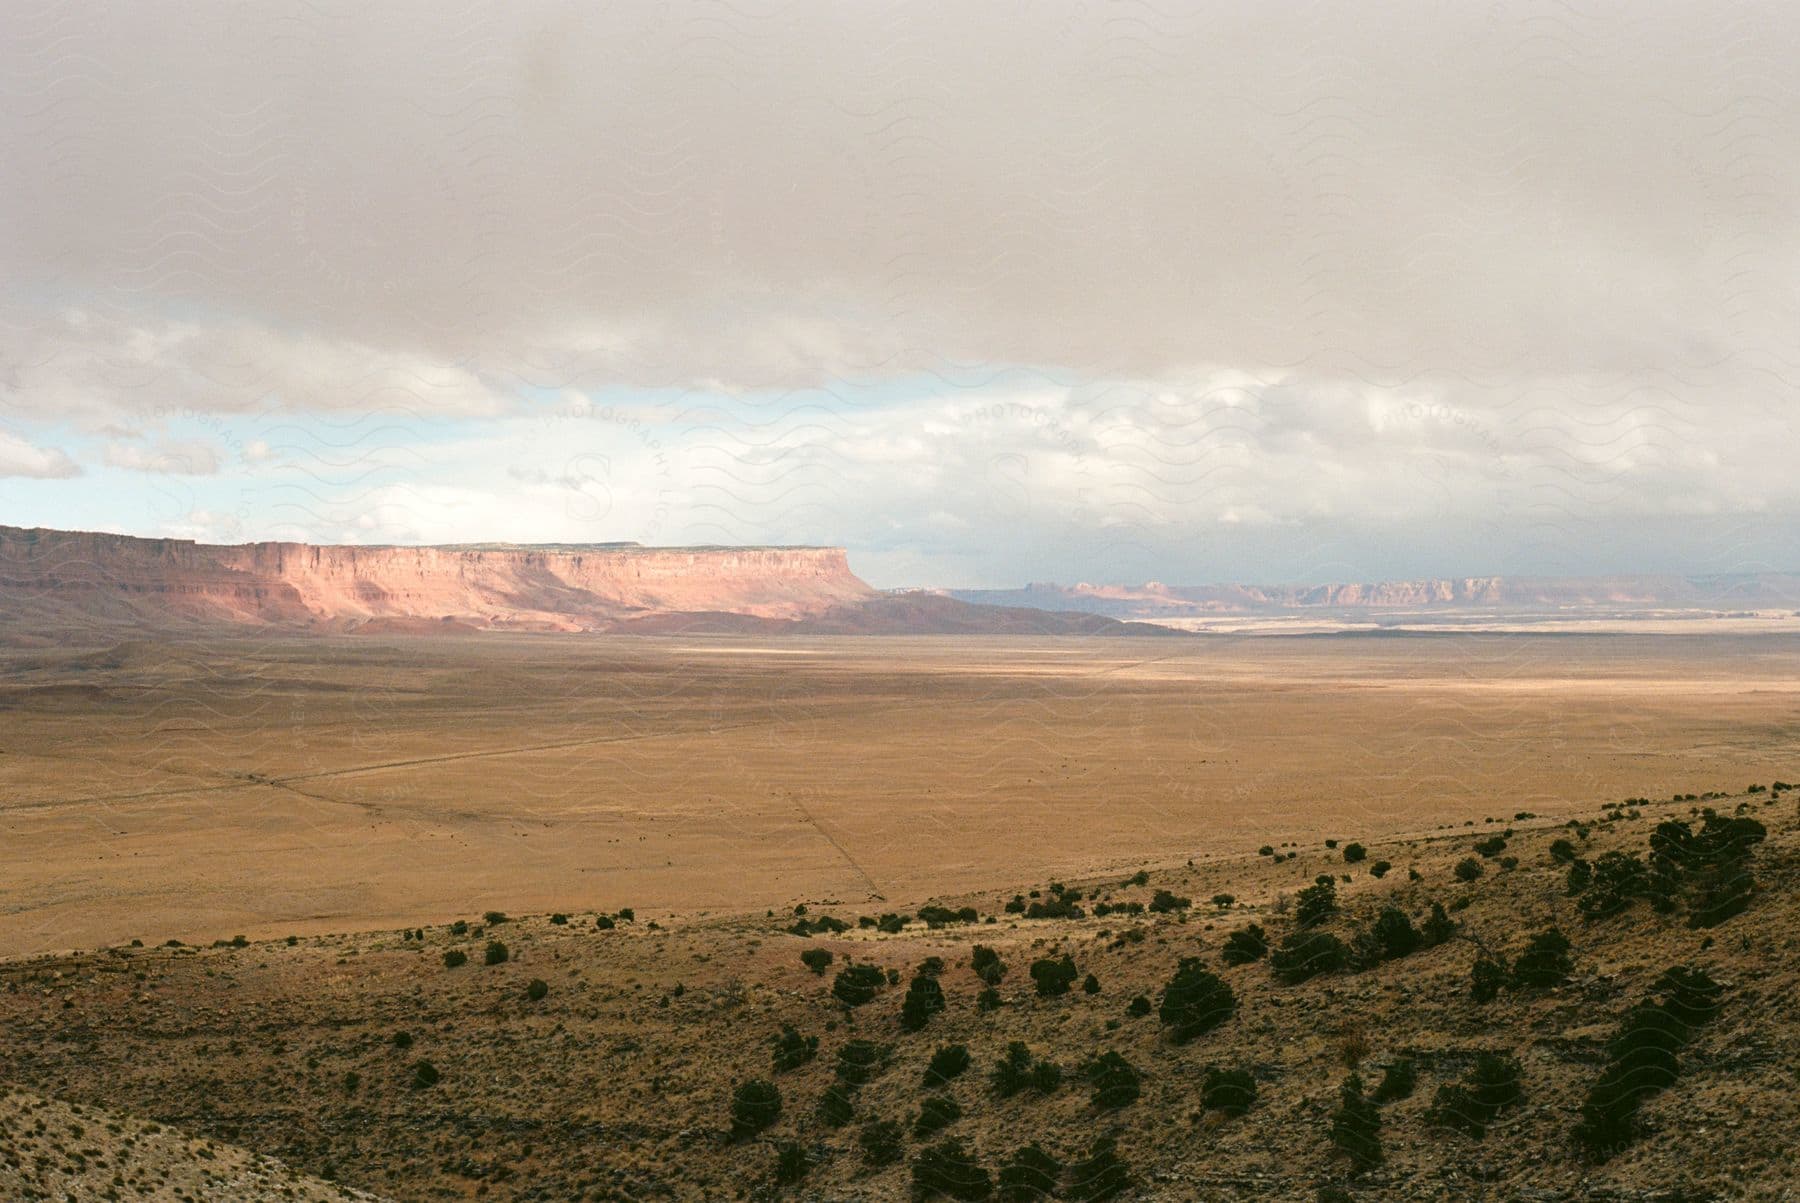 Natural landscape with dry soil and canyons on the horizon on a blue sky day with clouds.